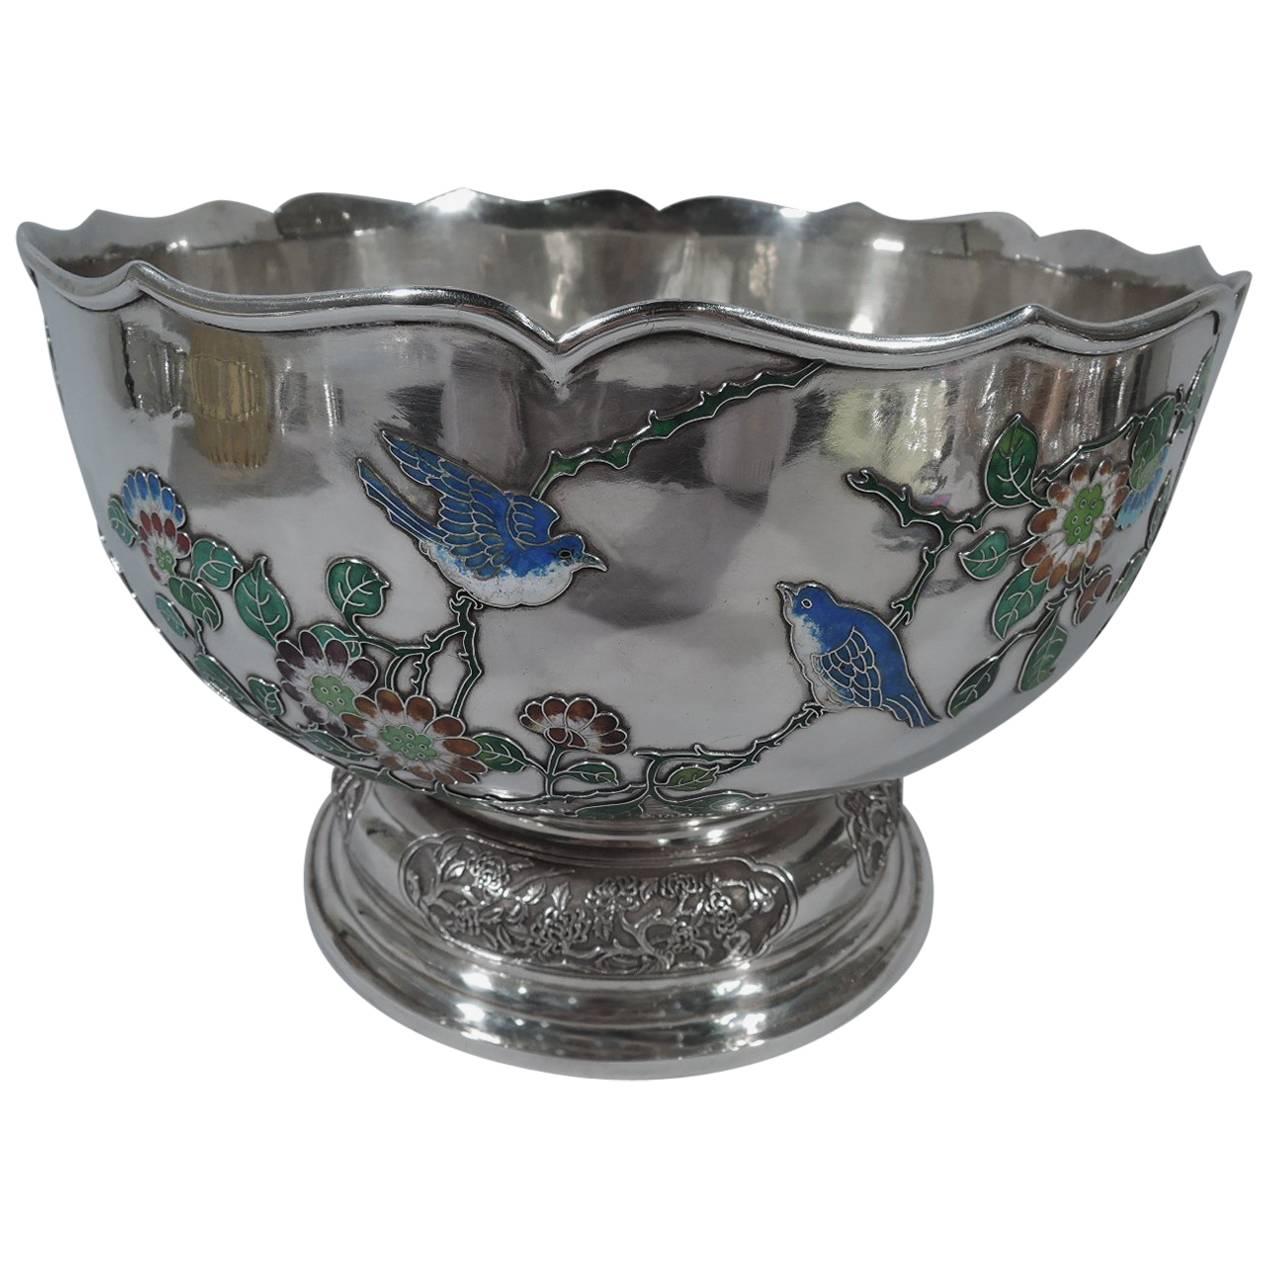 Very Fine Chinese Silver and Enamel Centrepiece Bowl by Wang Hing